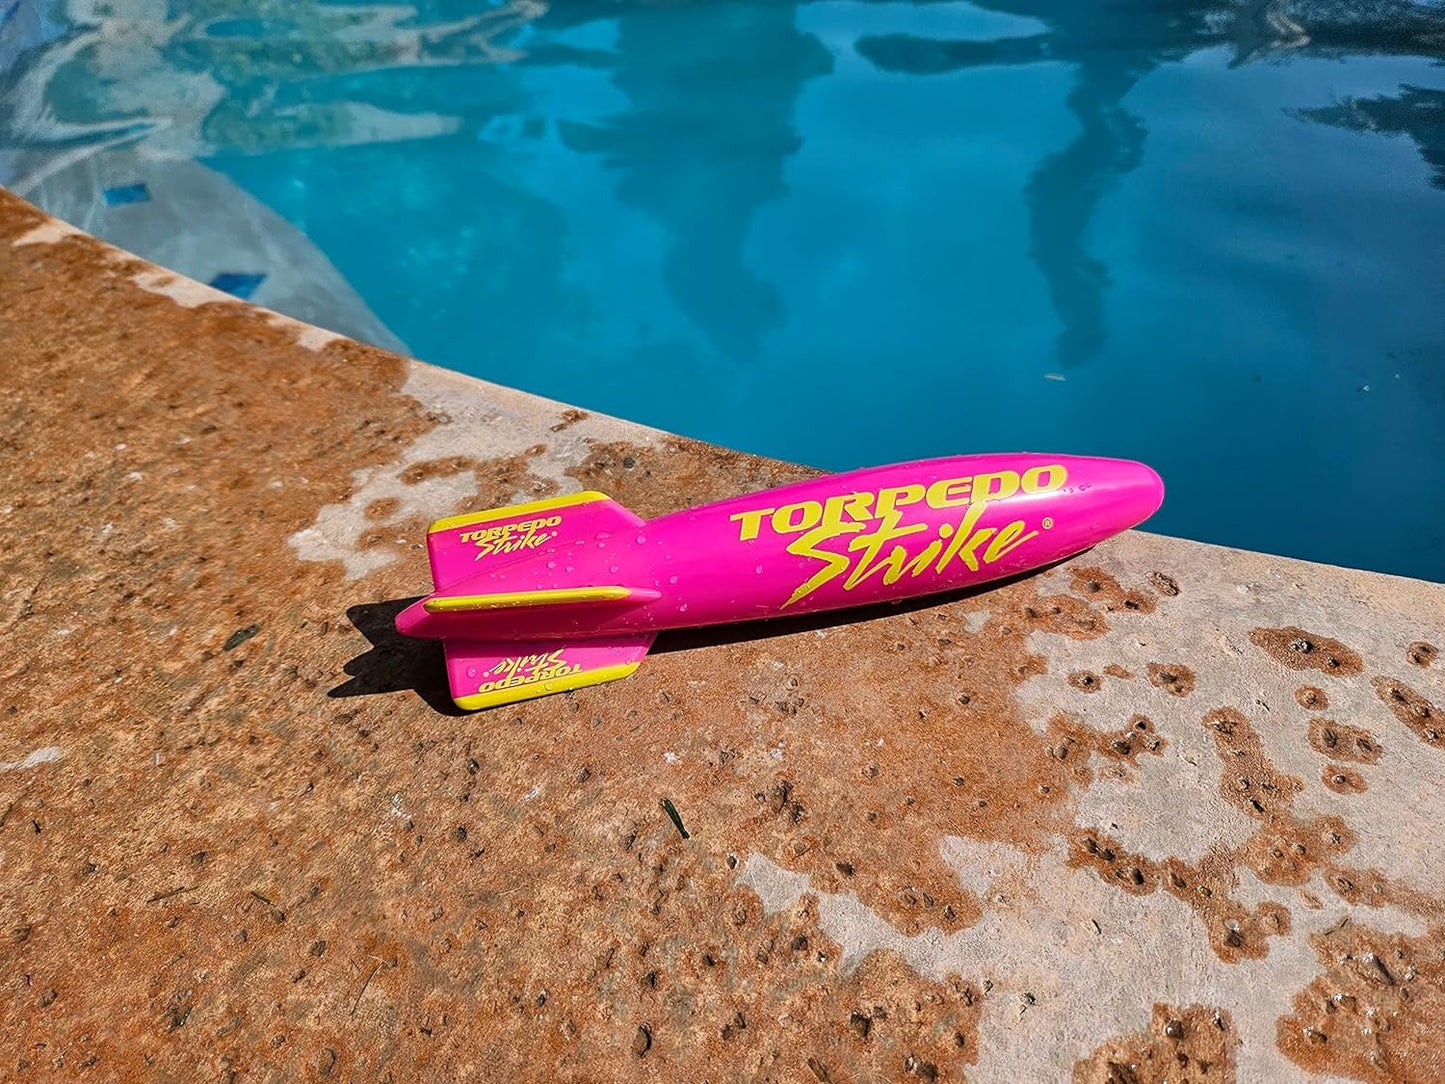 Spinfin 10.25" Large Pool Torpedo Rocket Spins & Glides up to 30 Feet like Underwater Football for under Water Passing Games Underwater Torpedo Diving Toy Glider (Pink)